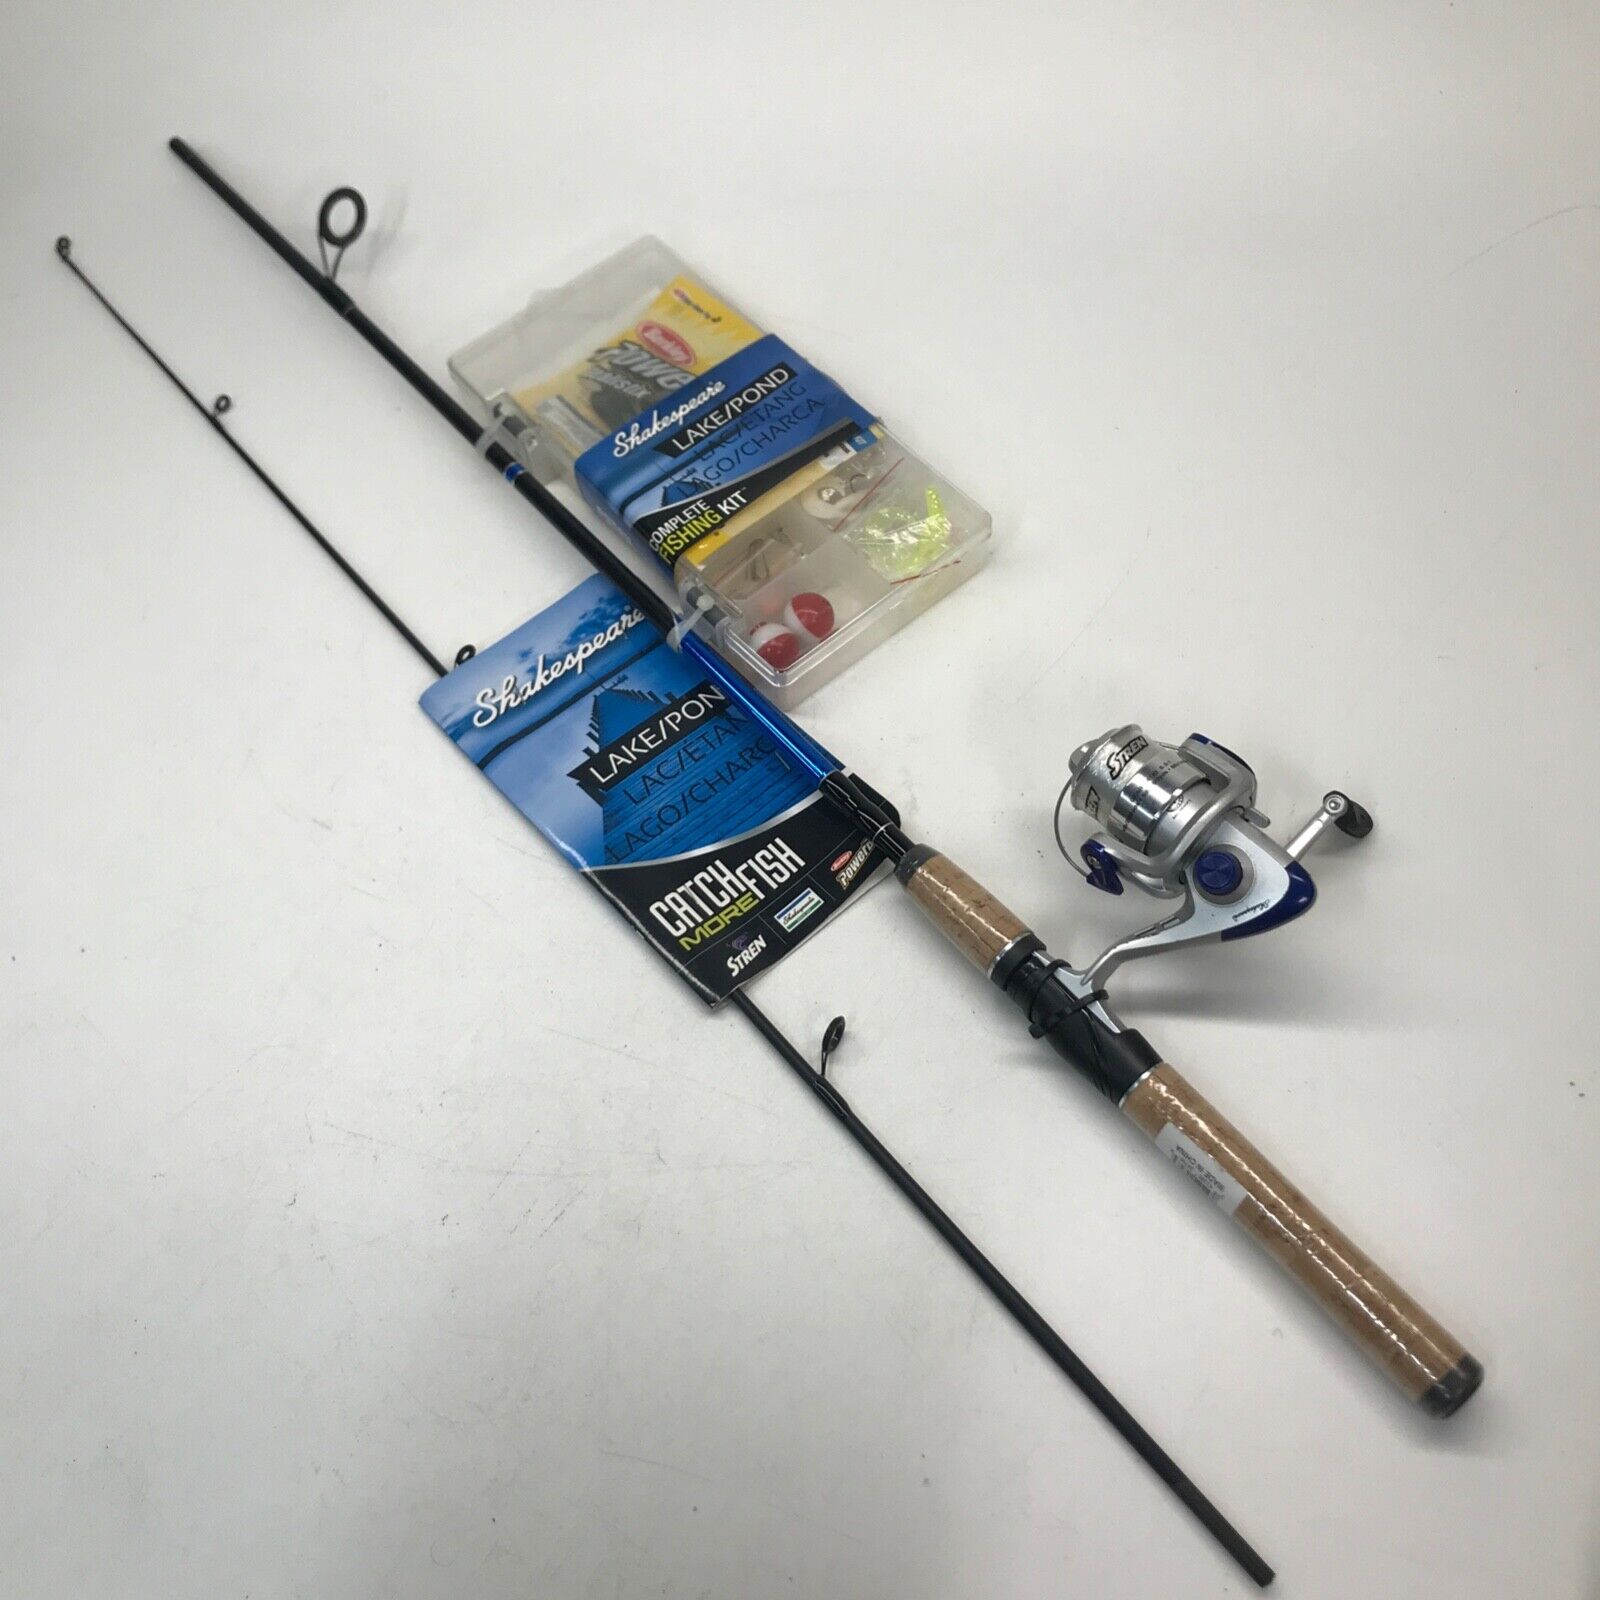 Shakespeare Catch More Fish 6' Rod & Reel Combo Lake & Pond Fishing Kit w/ Tackle